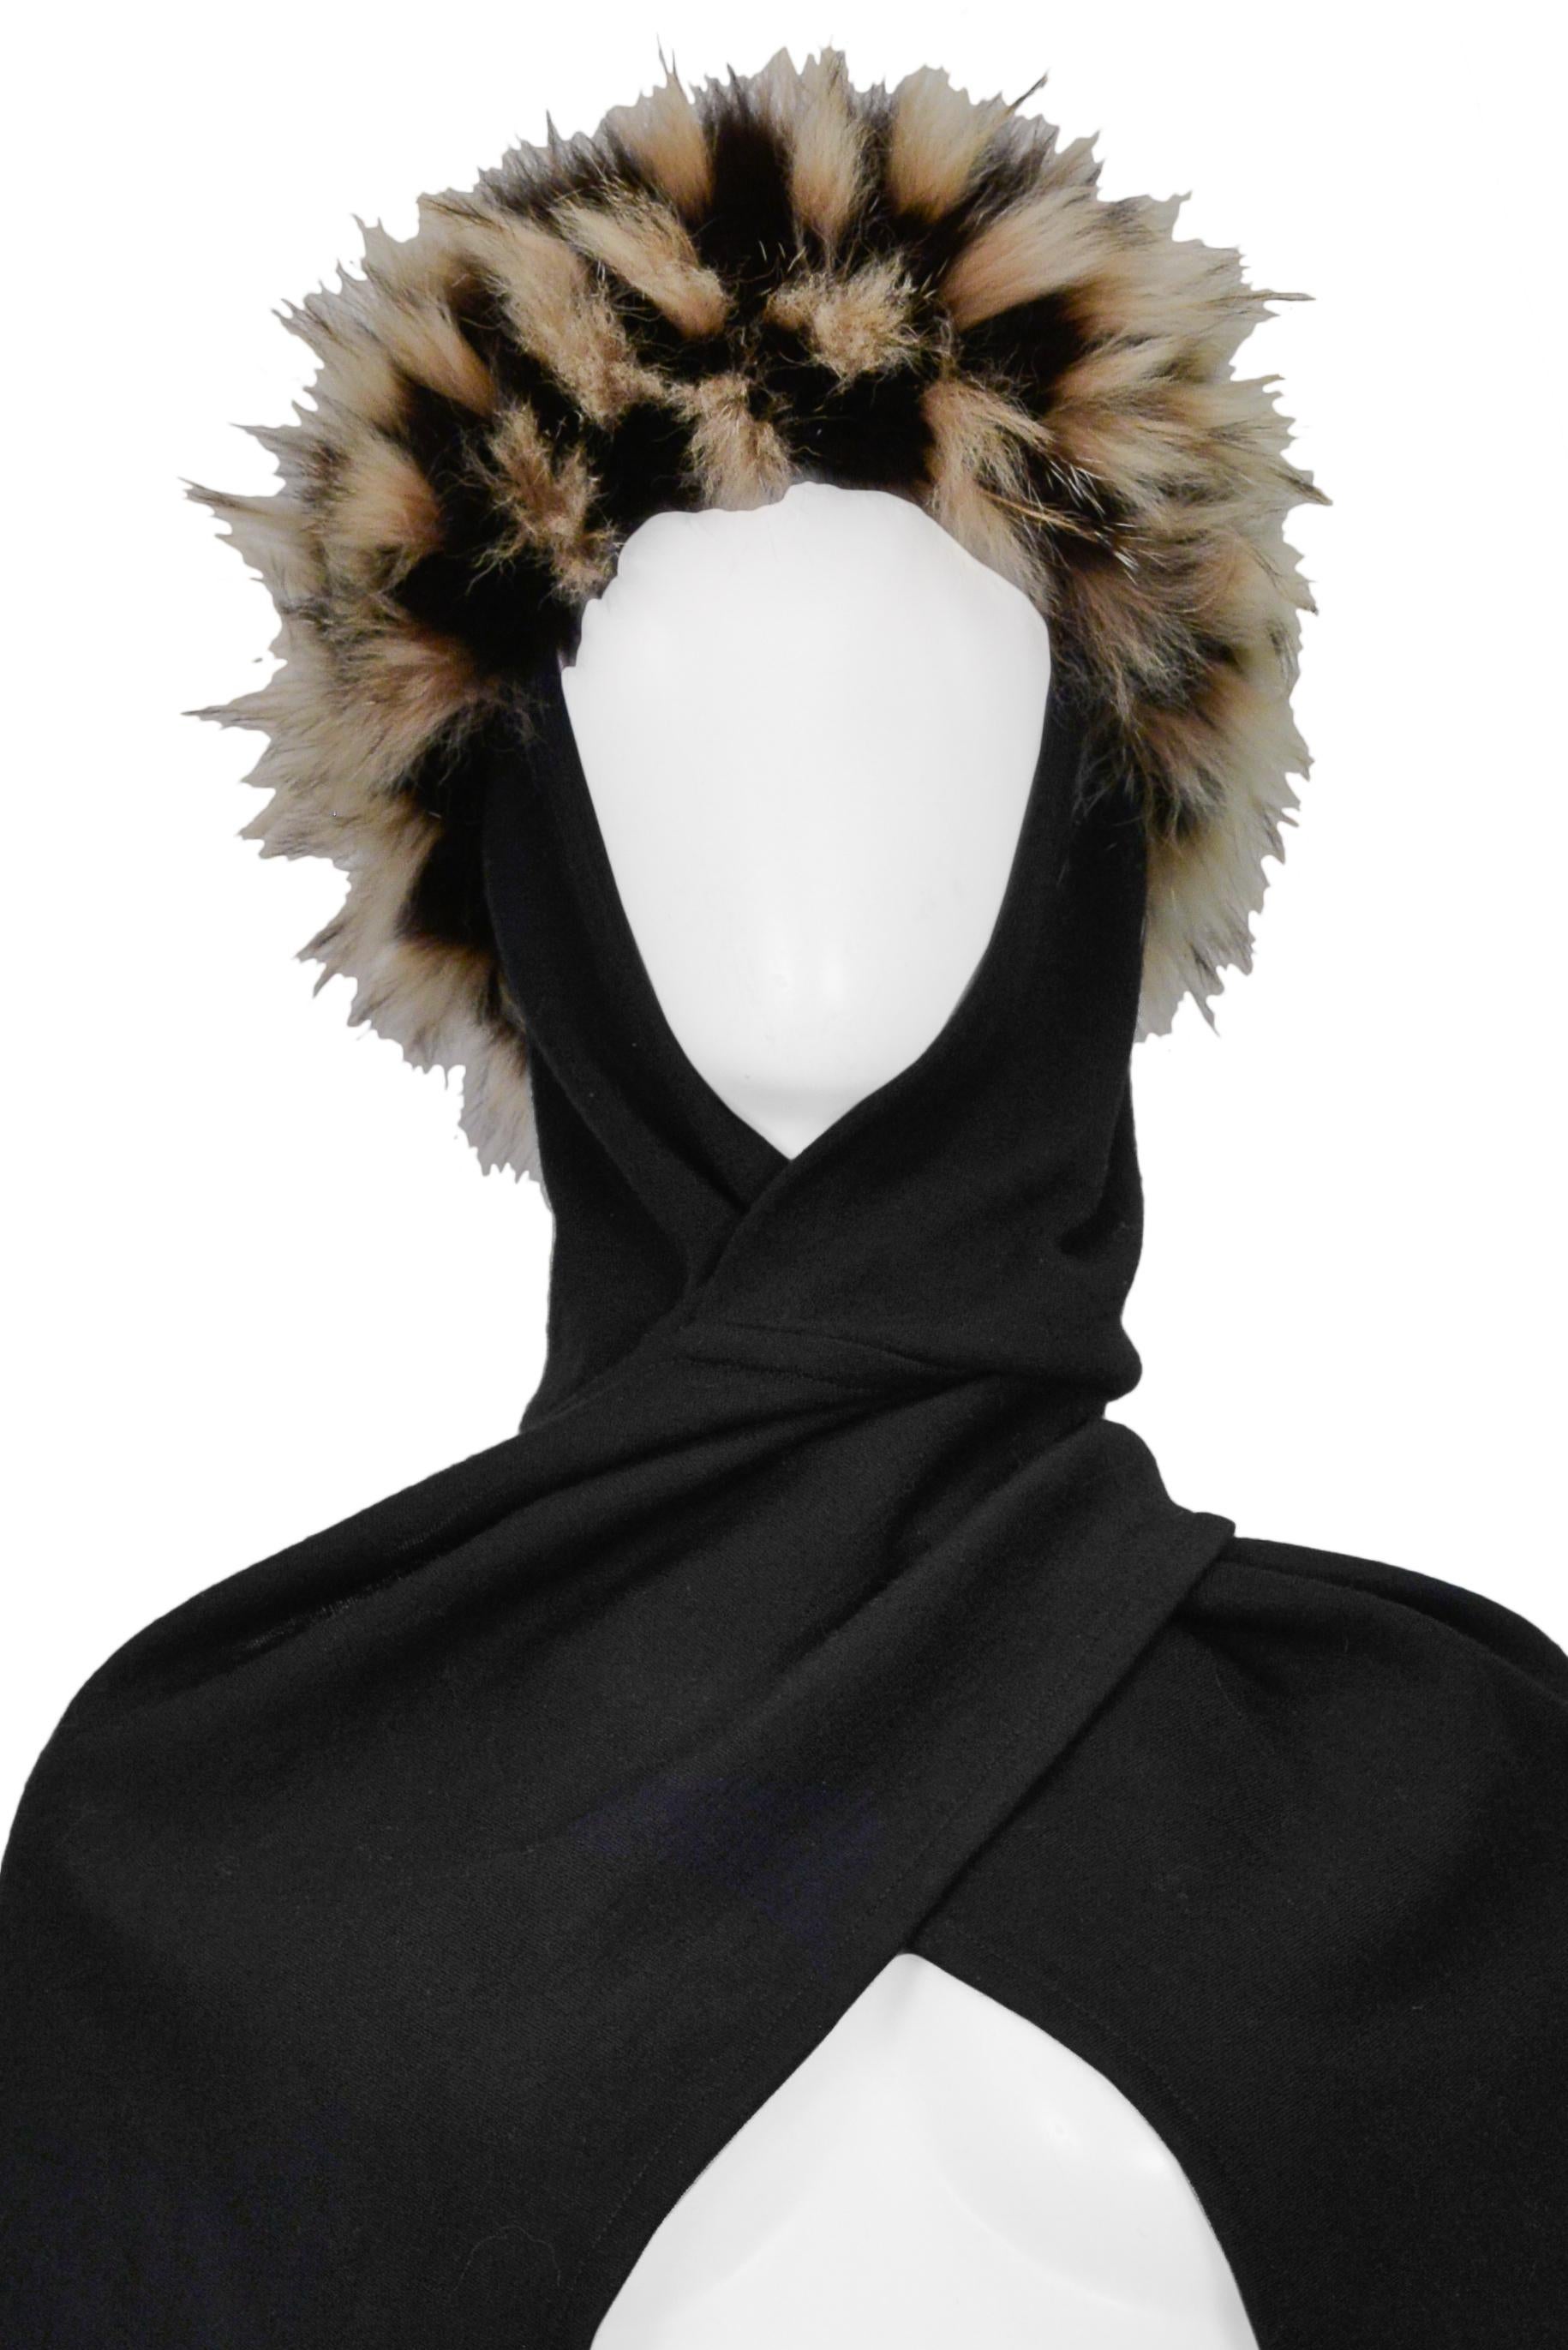 Resurrection Vintage is excited to present a vintage Yves Saint Laurent YSL fur hat with attached black knit wrap. 

Yves Saint Laurent
Size: One Size
Fur and Black Wool Jersey
Excellent Vintage Condition
Authenticity Guaranteed 